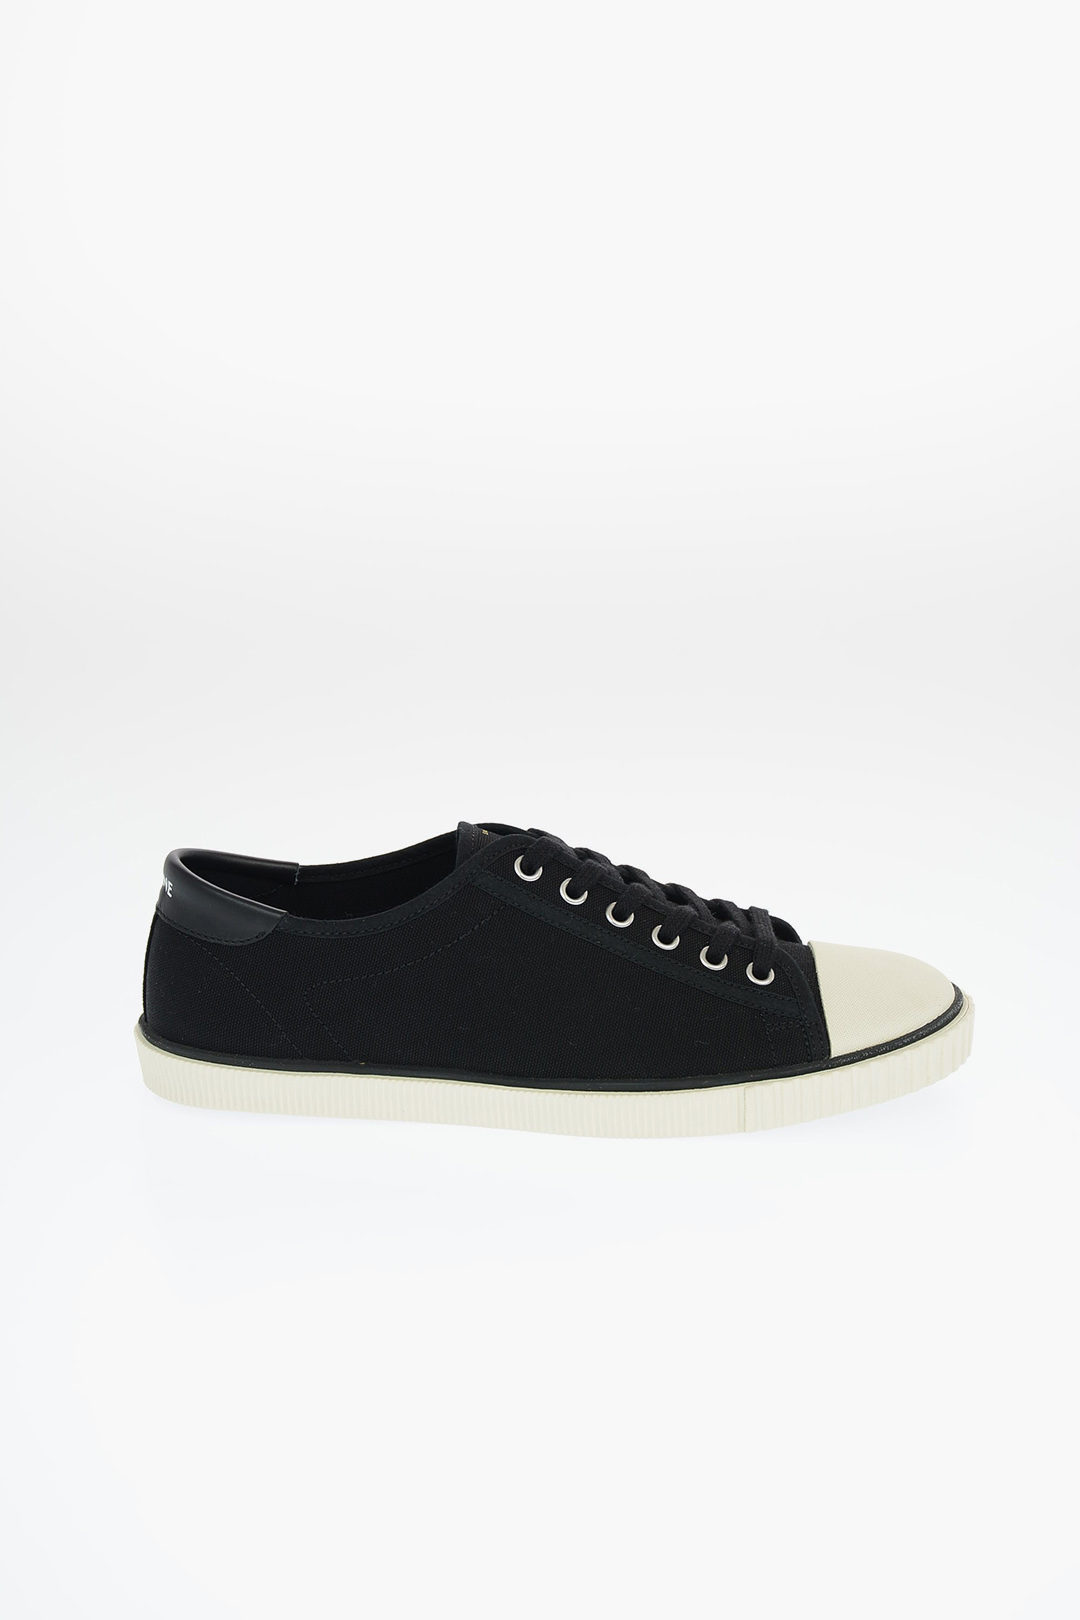 Celine Leather and Canvas BLANK Sneakers men - Glamood Outlet